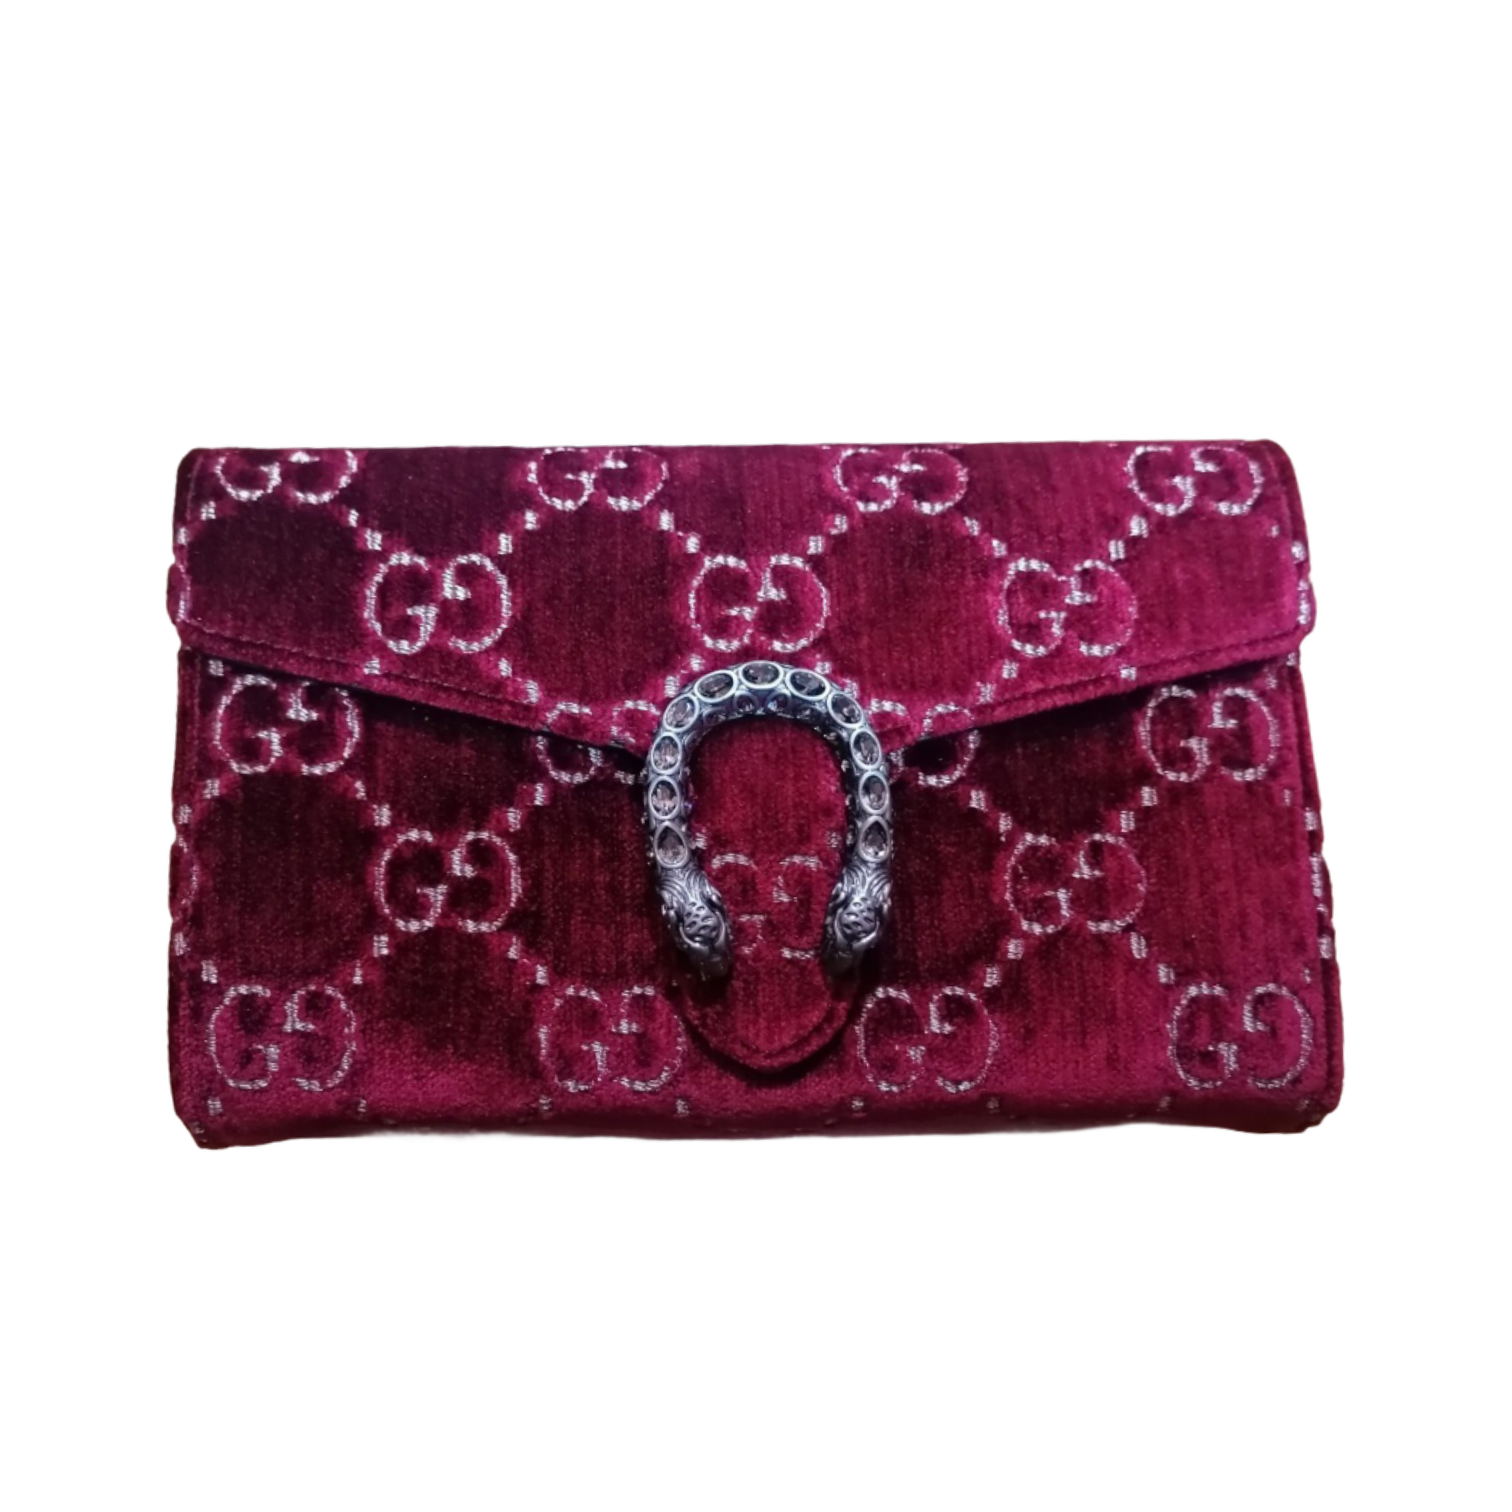 Pre Owned Gucci Red velvet bag - The Luxury Flavor